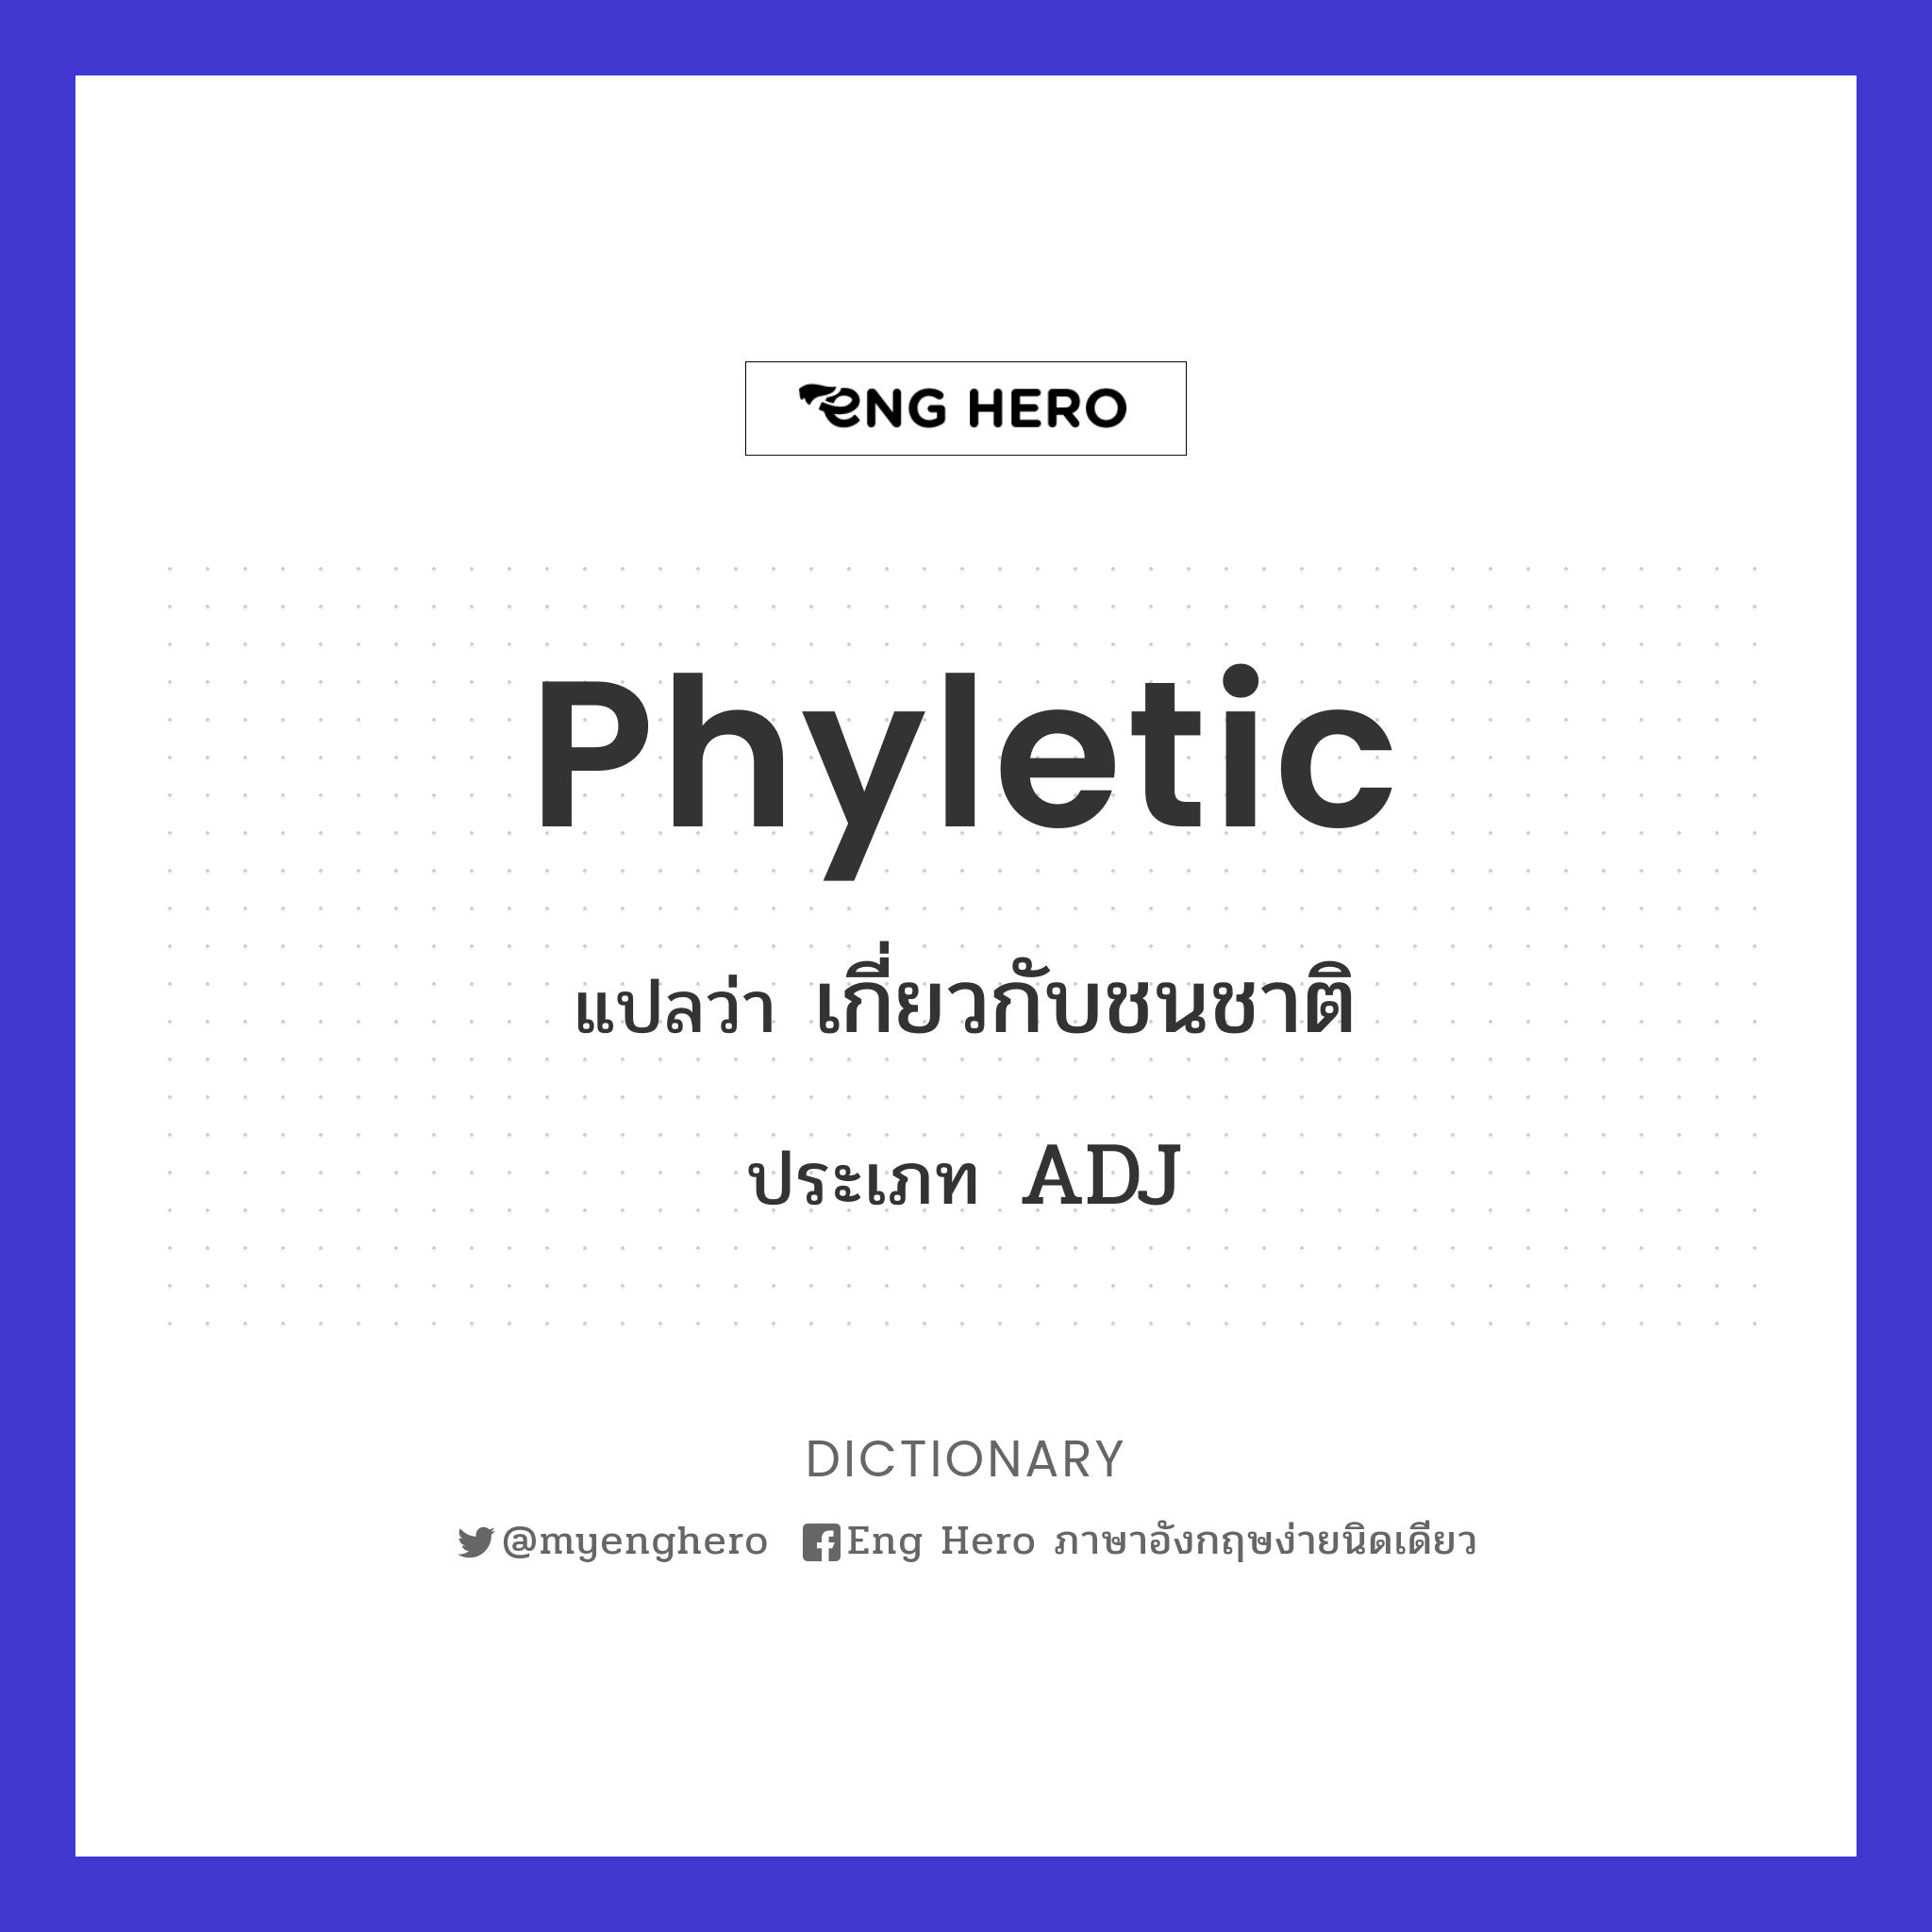 phyletic